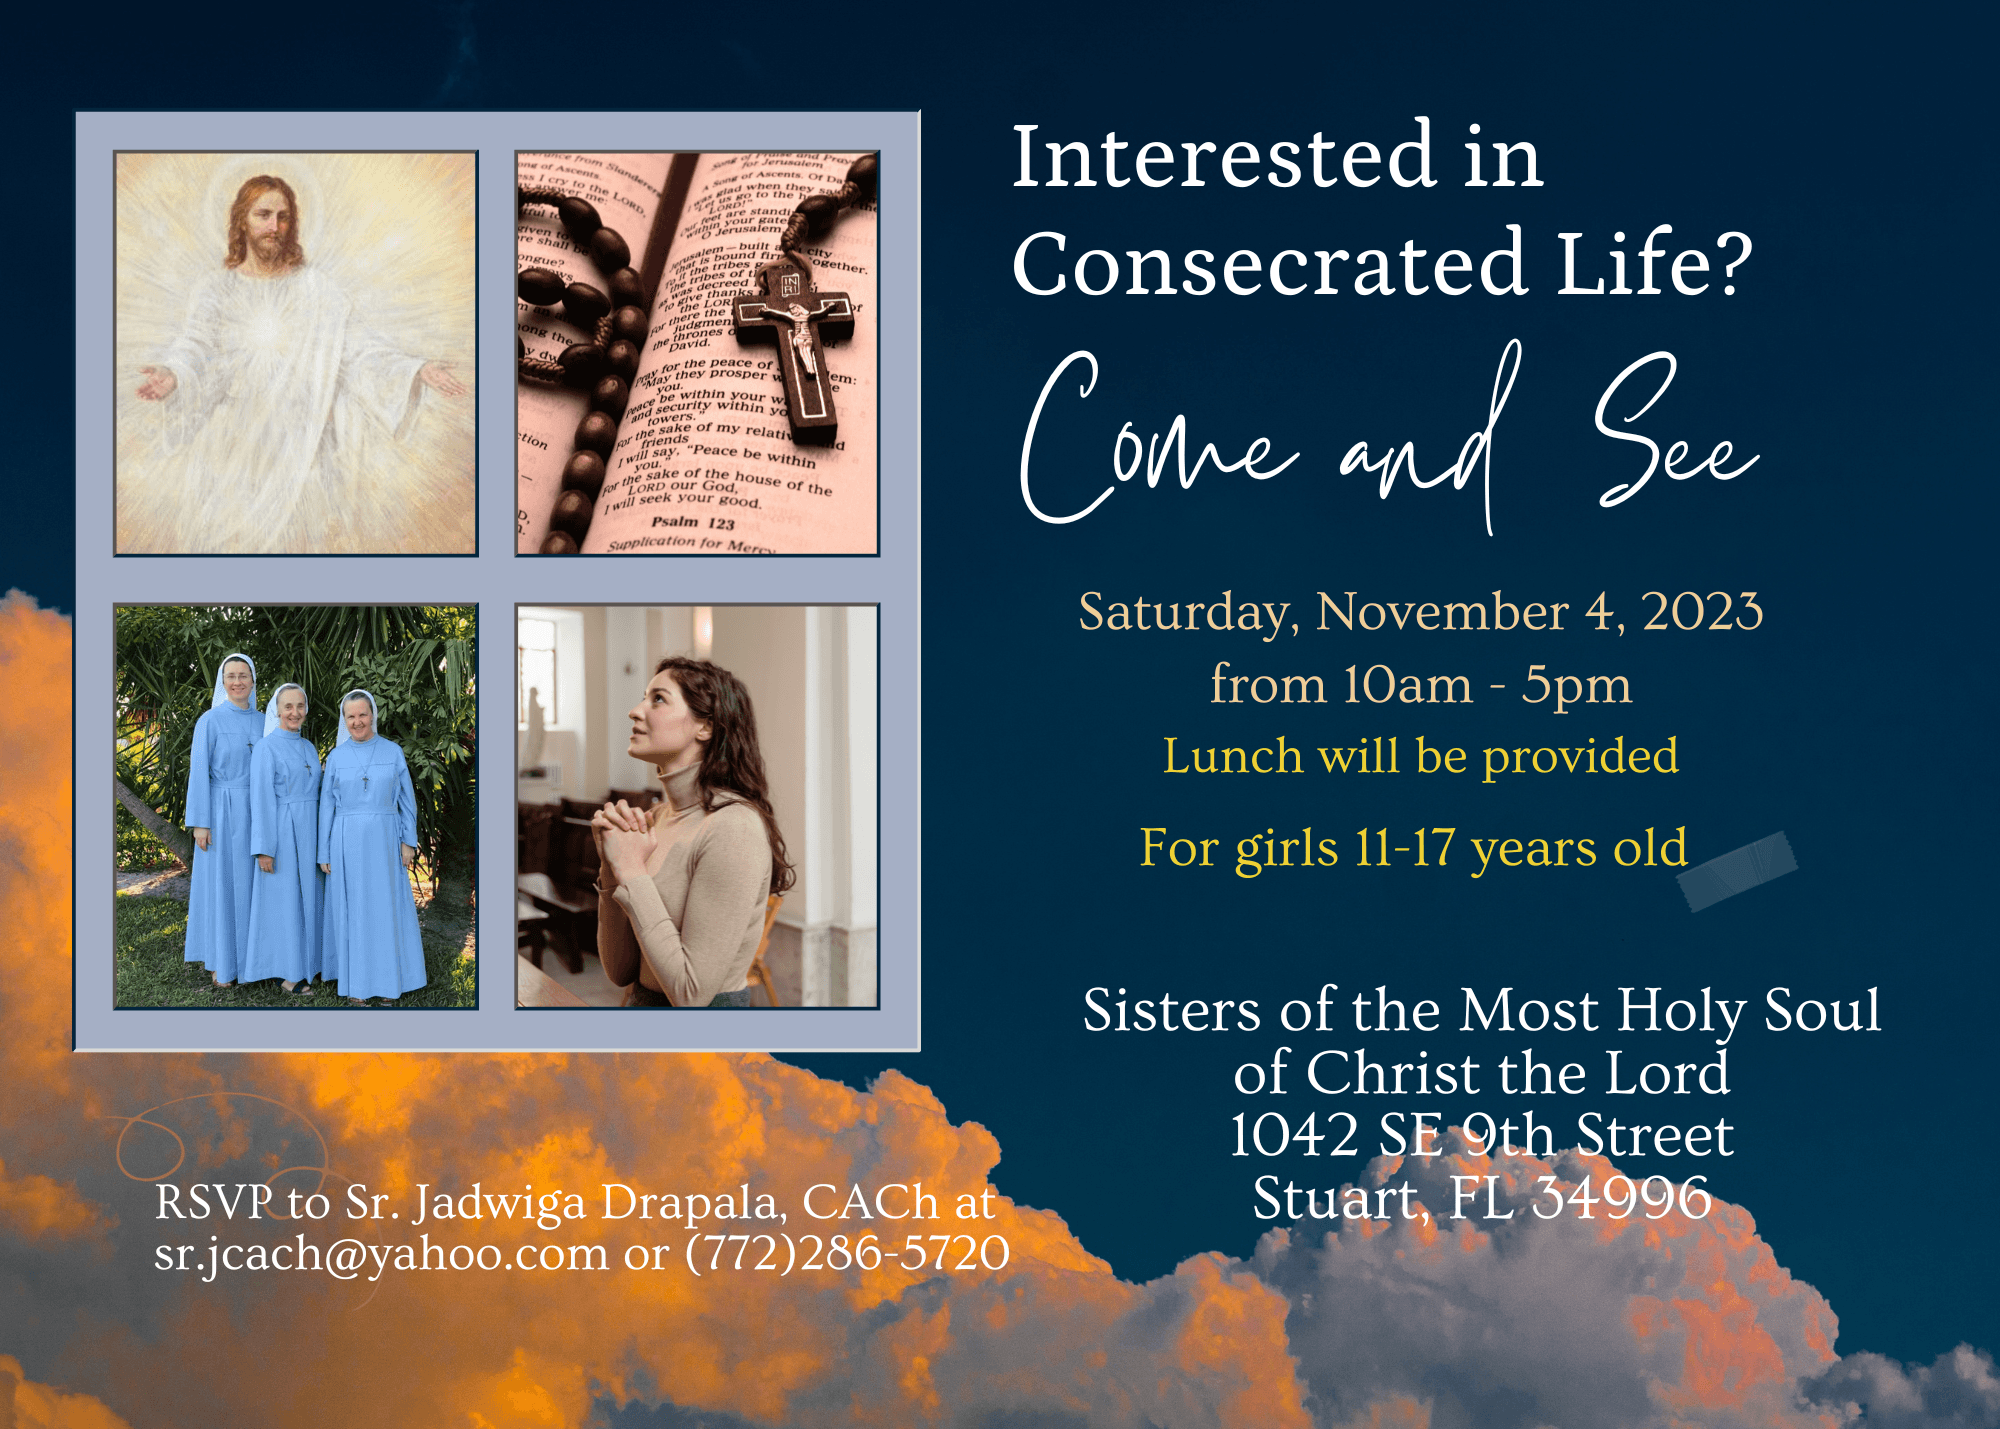 Interested in Consecrated Life?